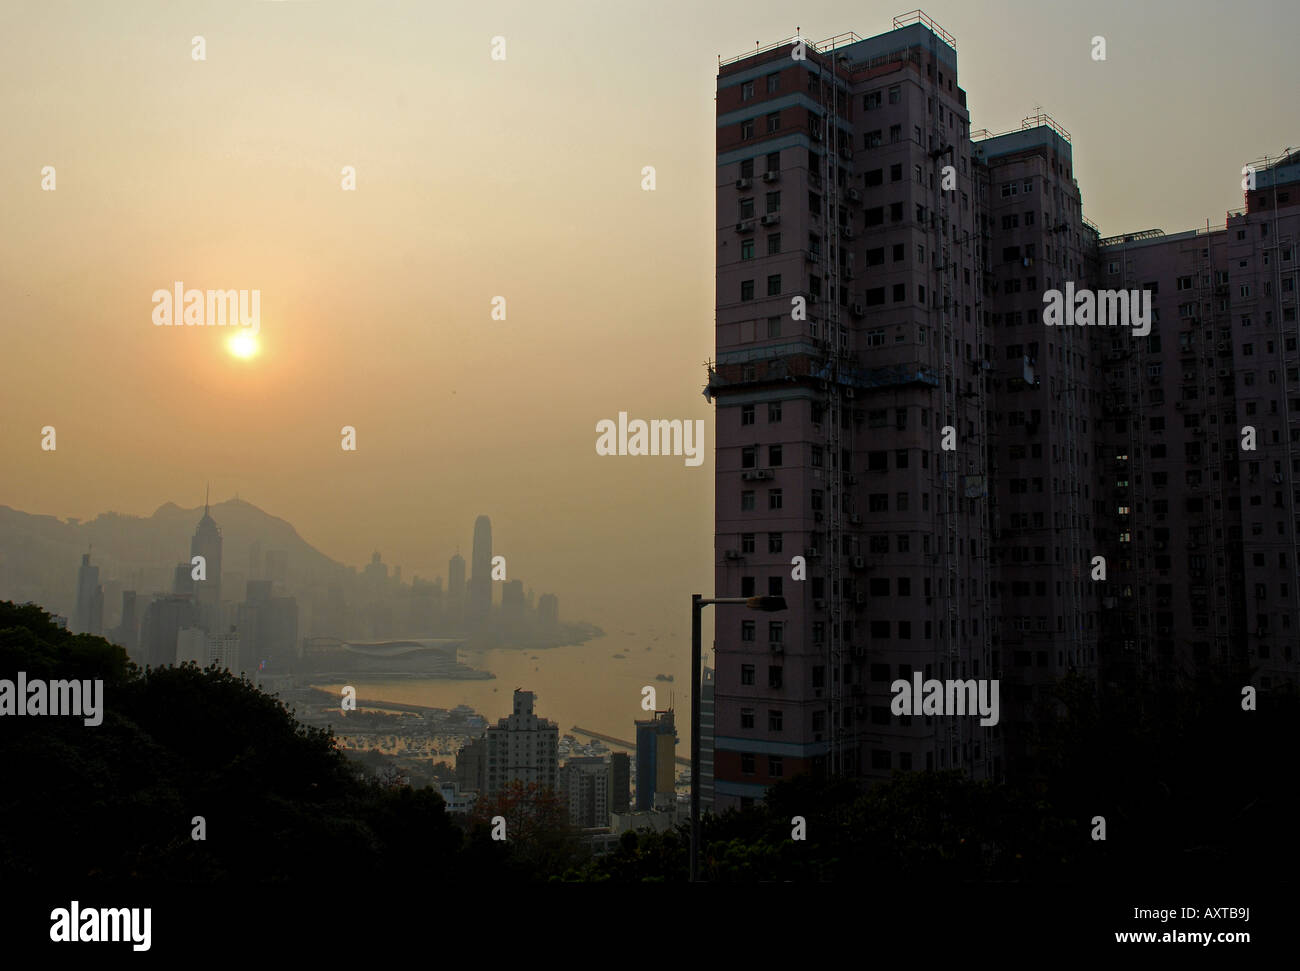 Tower block with view of Hong Kong in the background, taken from Bramer Hill. Asia. Stock Photo